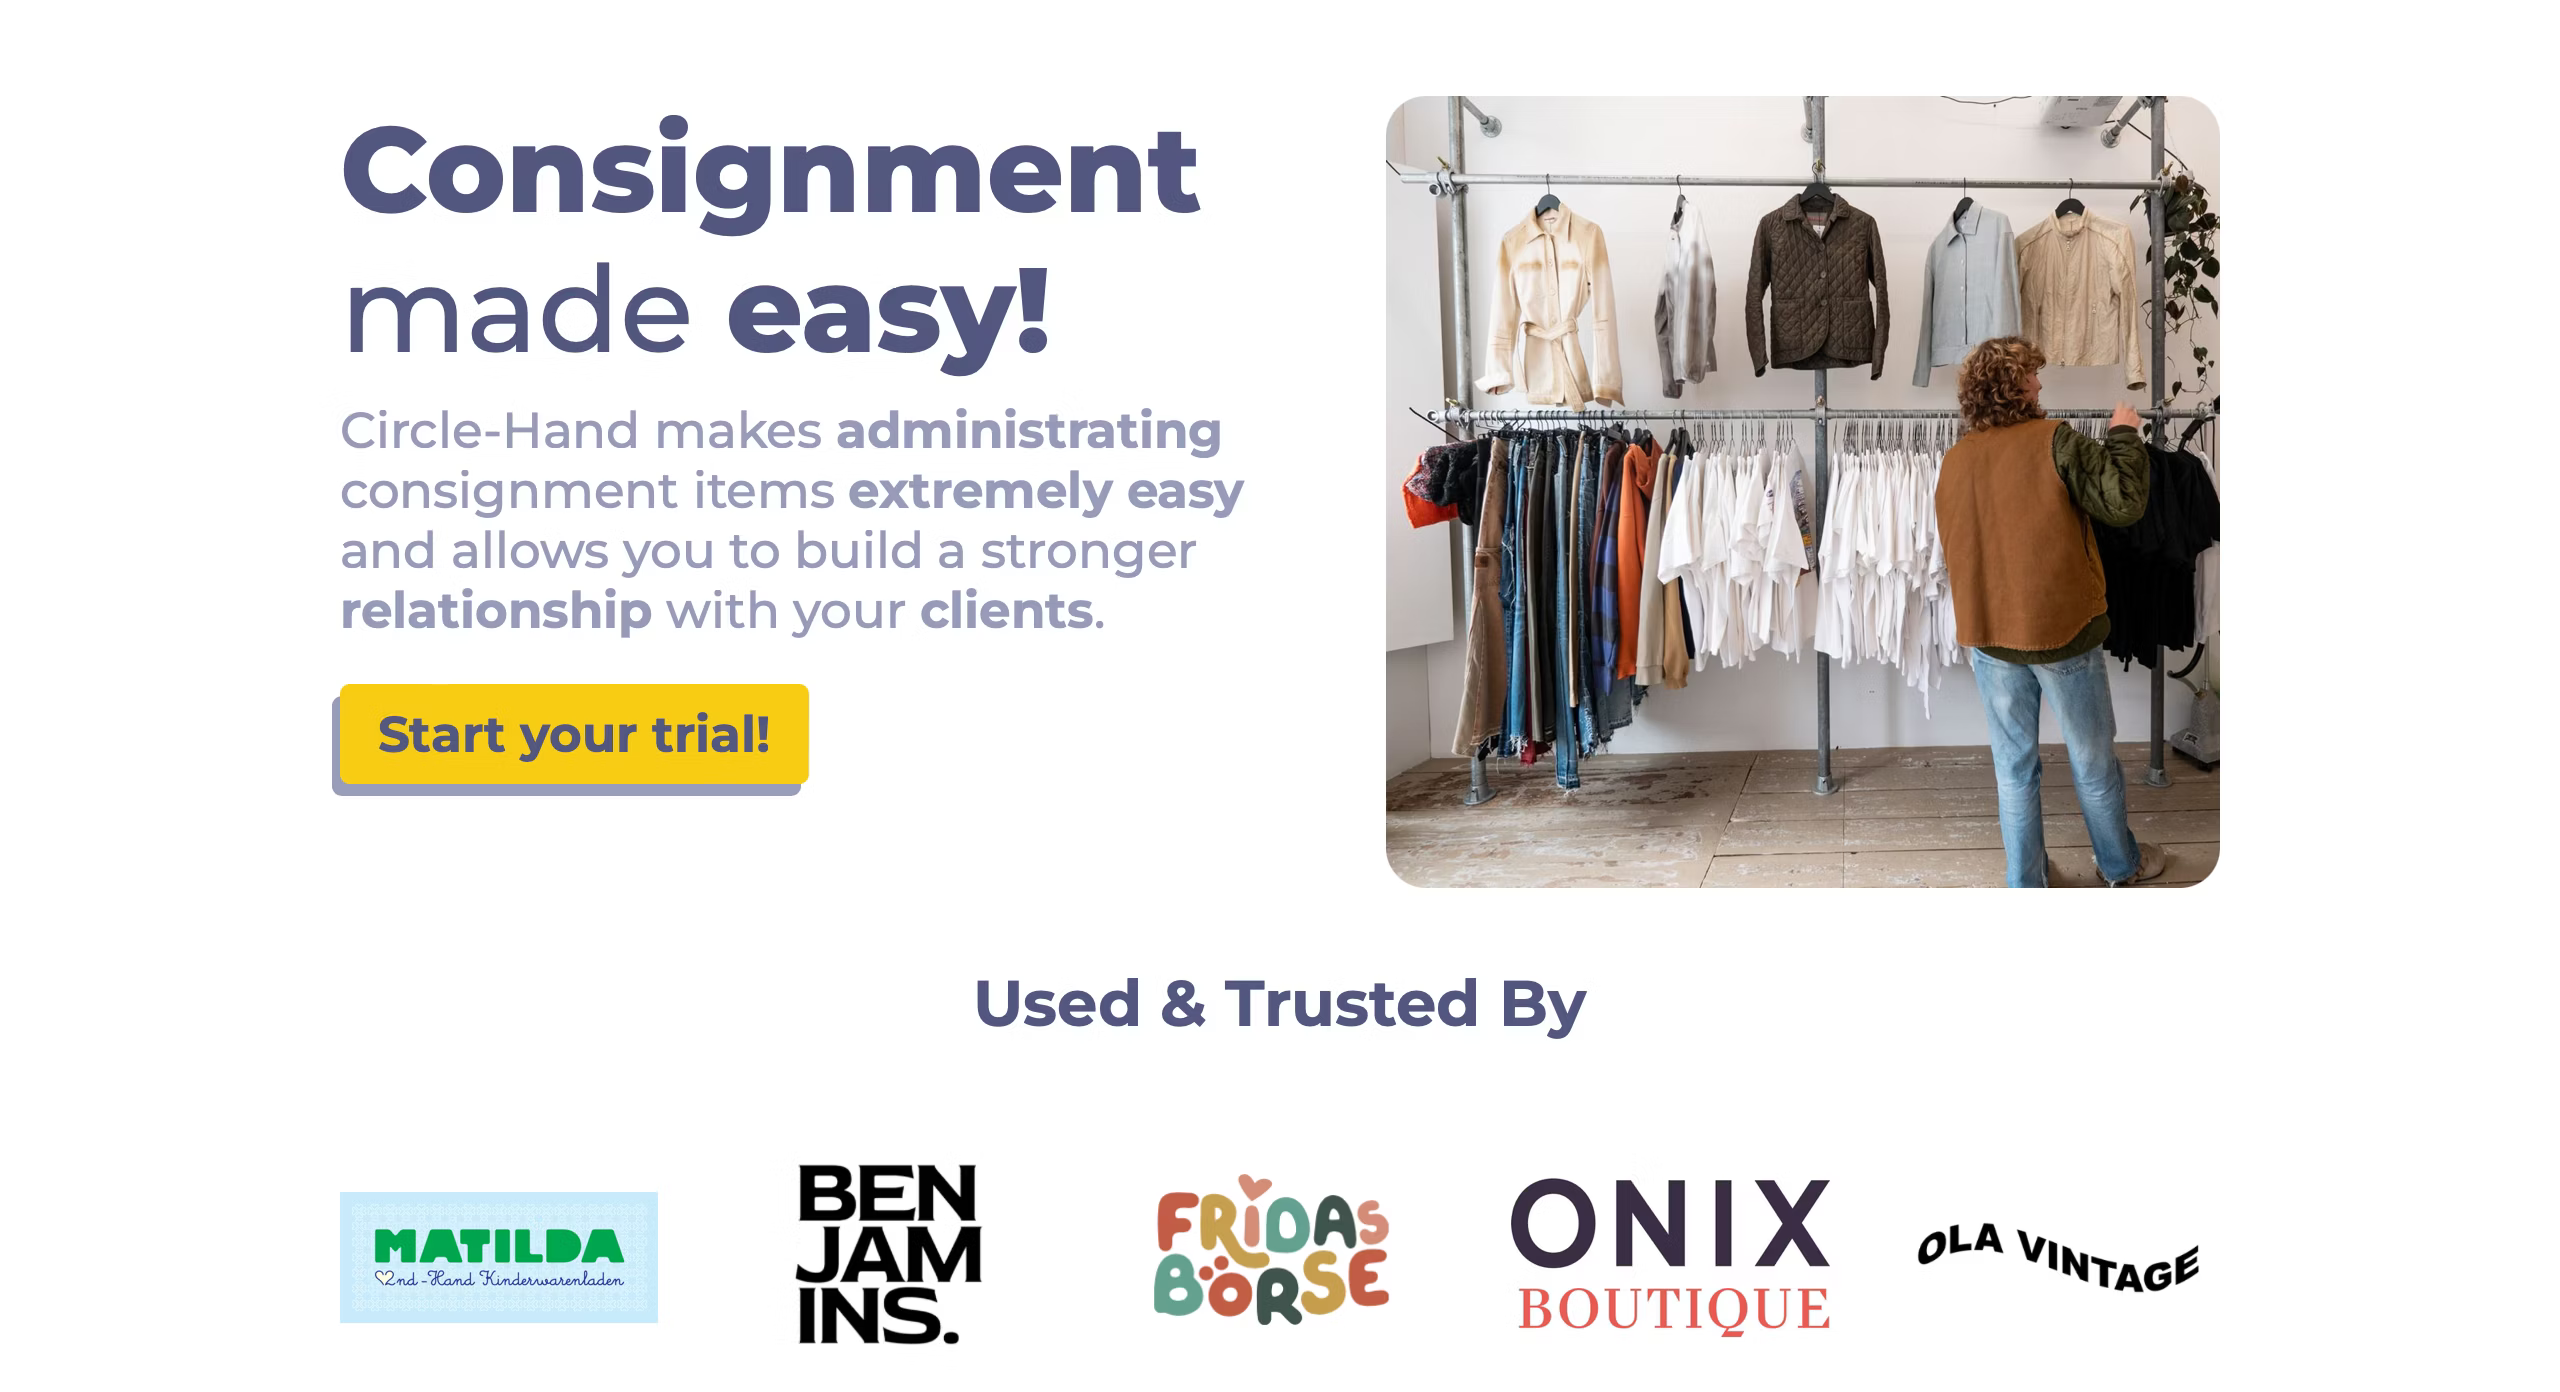 Consignment made easy